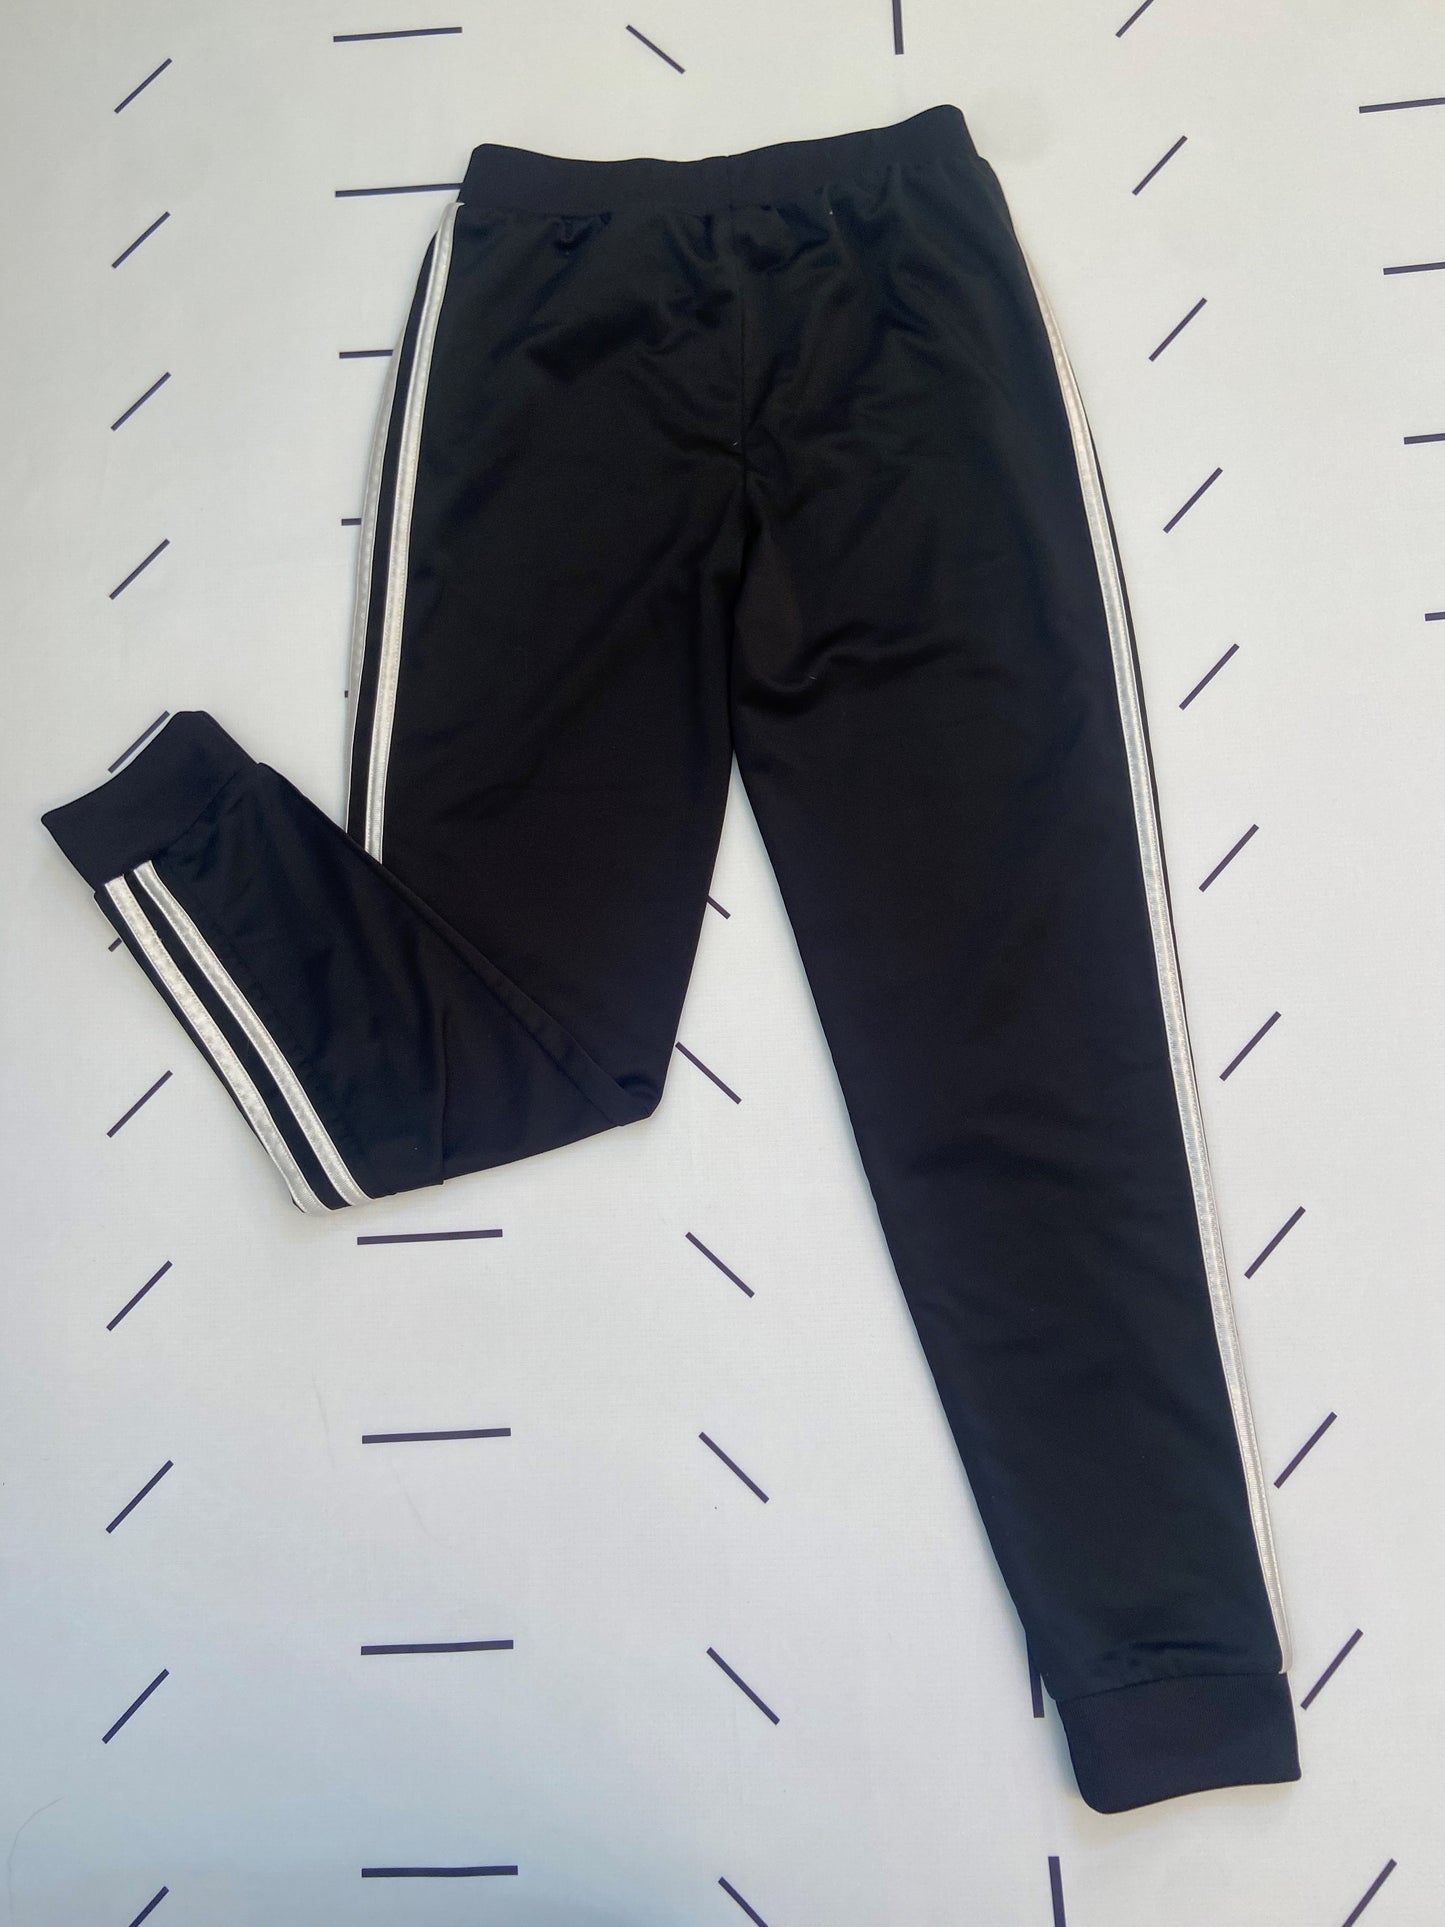 Cuffed Training Joggers with Pockets - Youth L